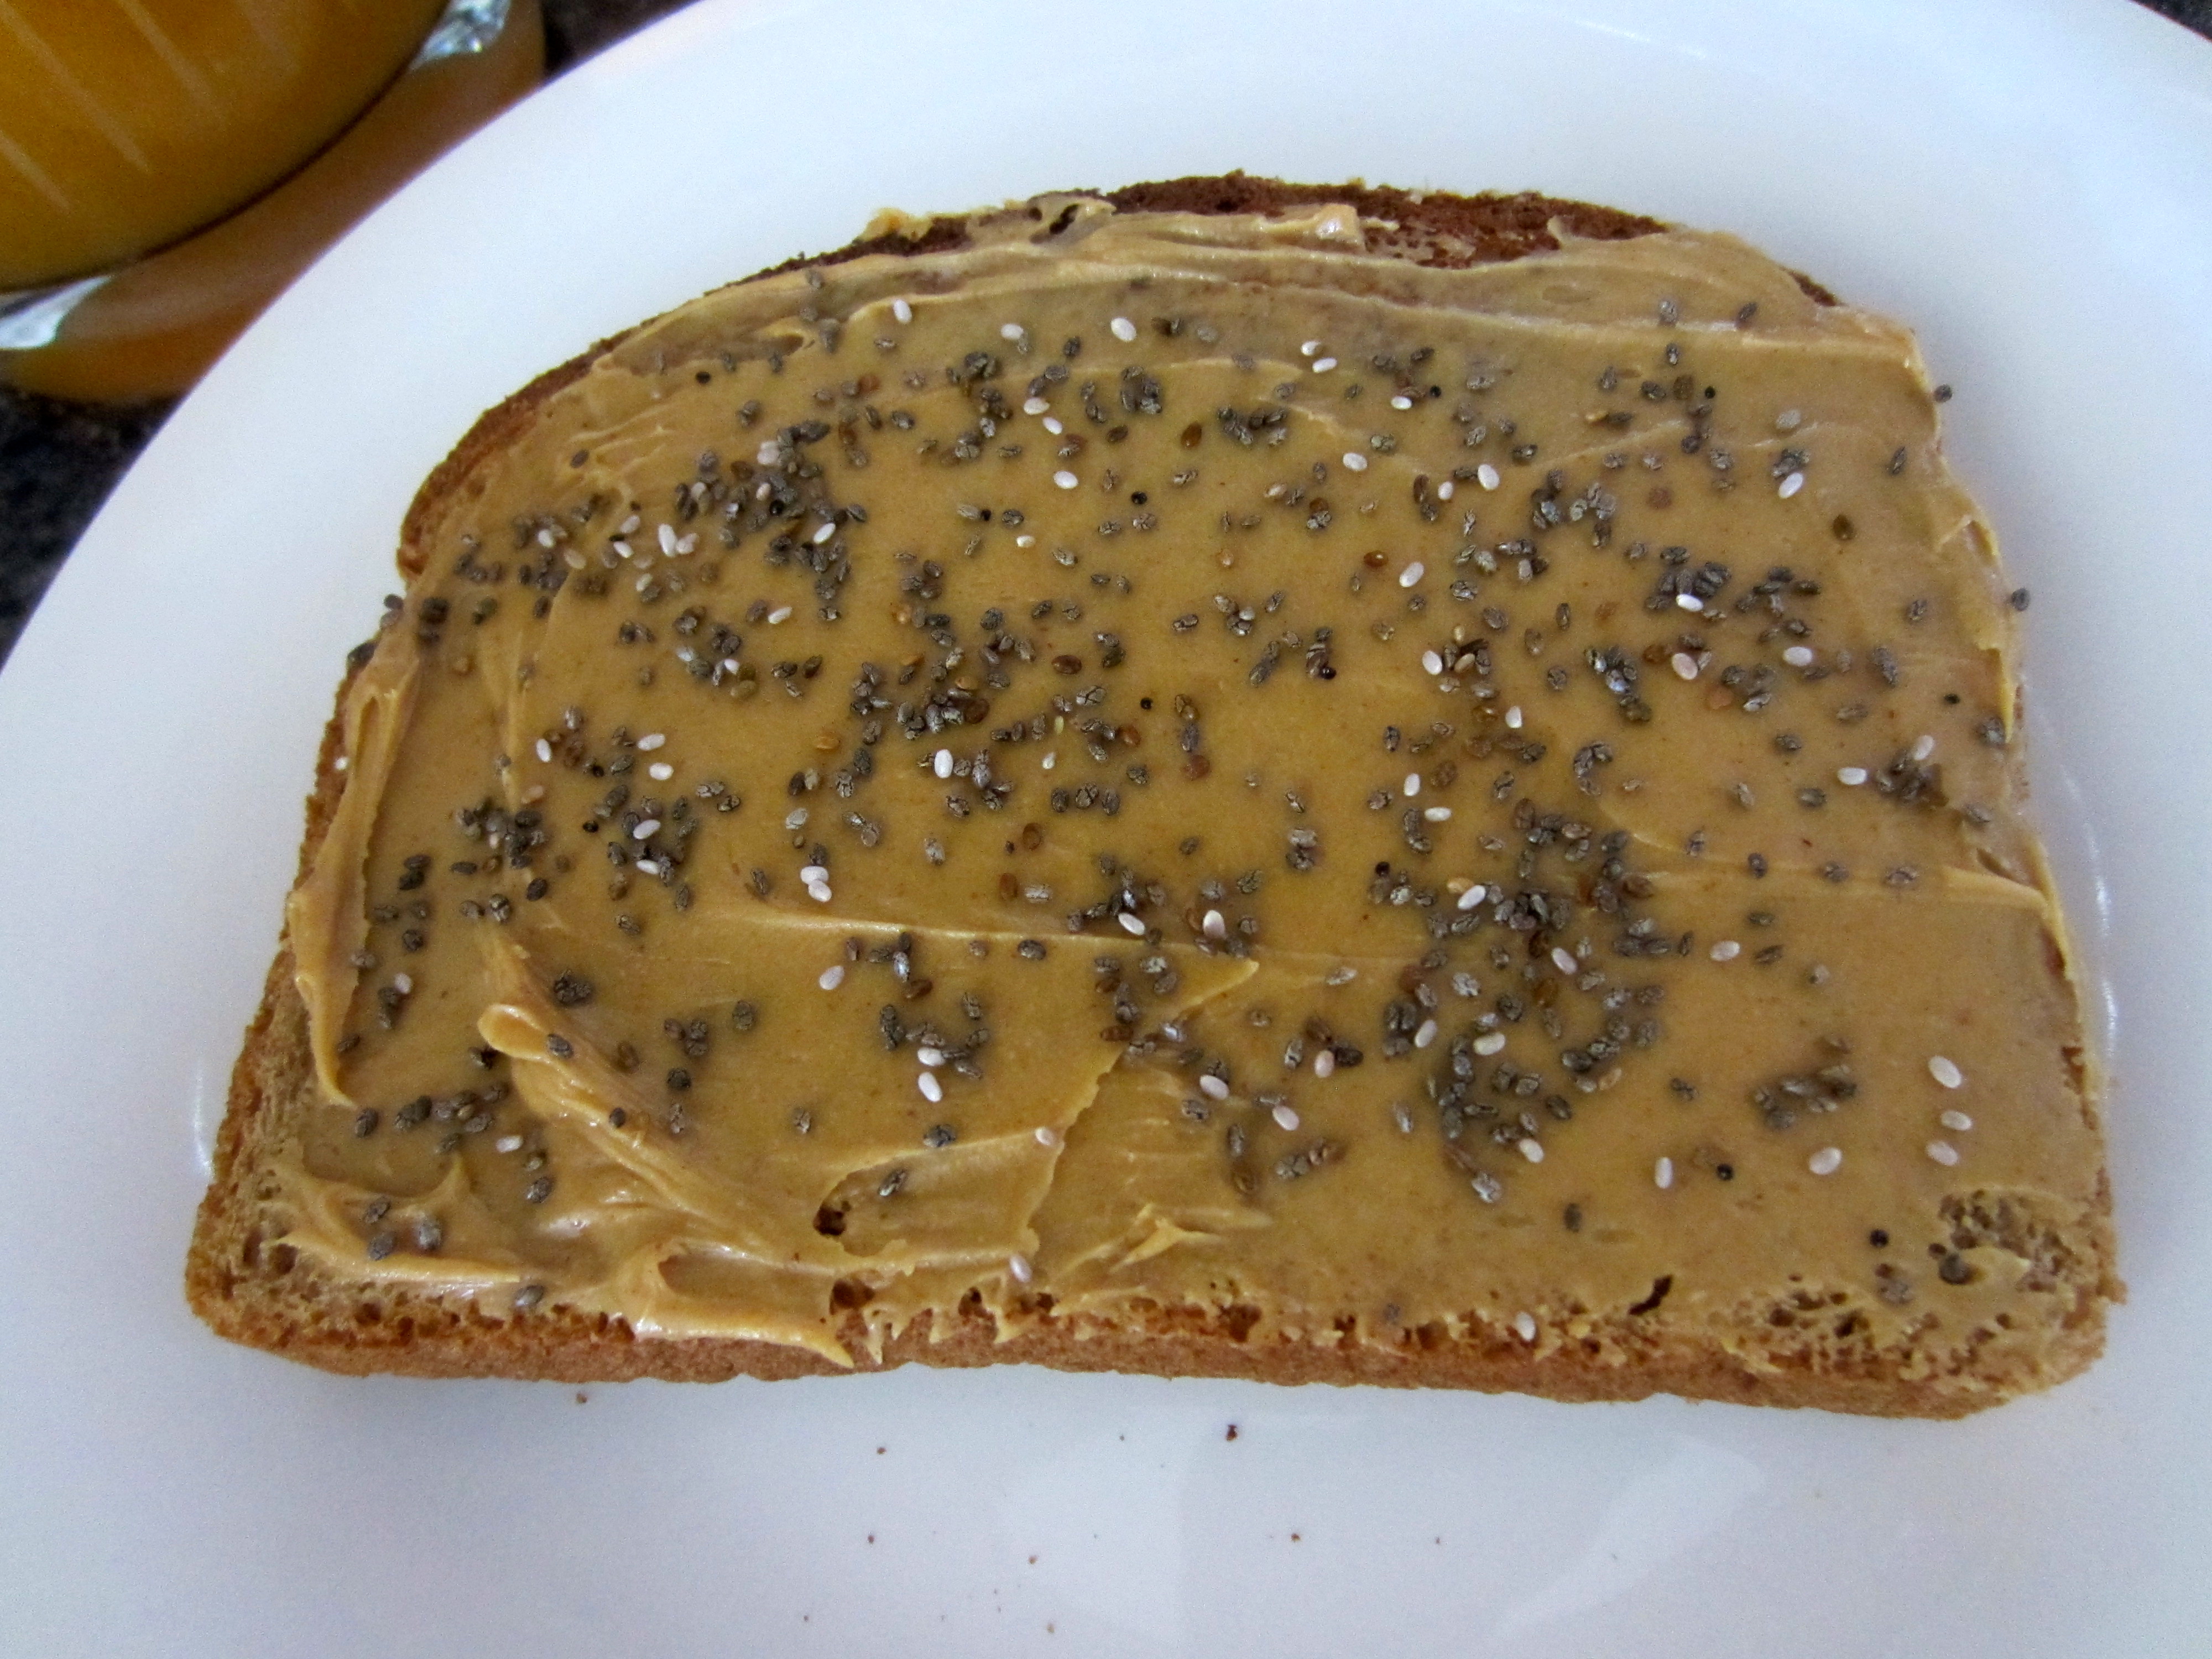 Peanut Butter and chia seeds on toast